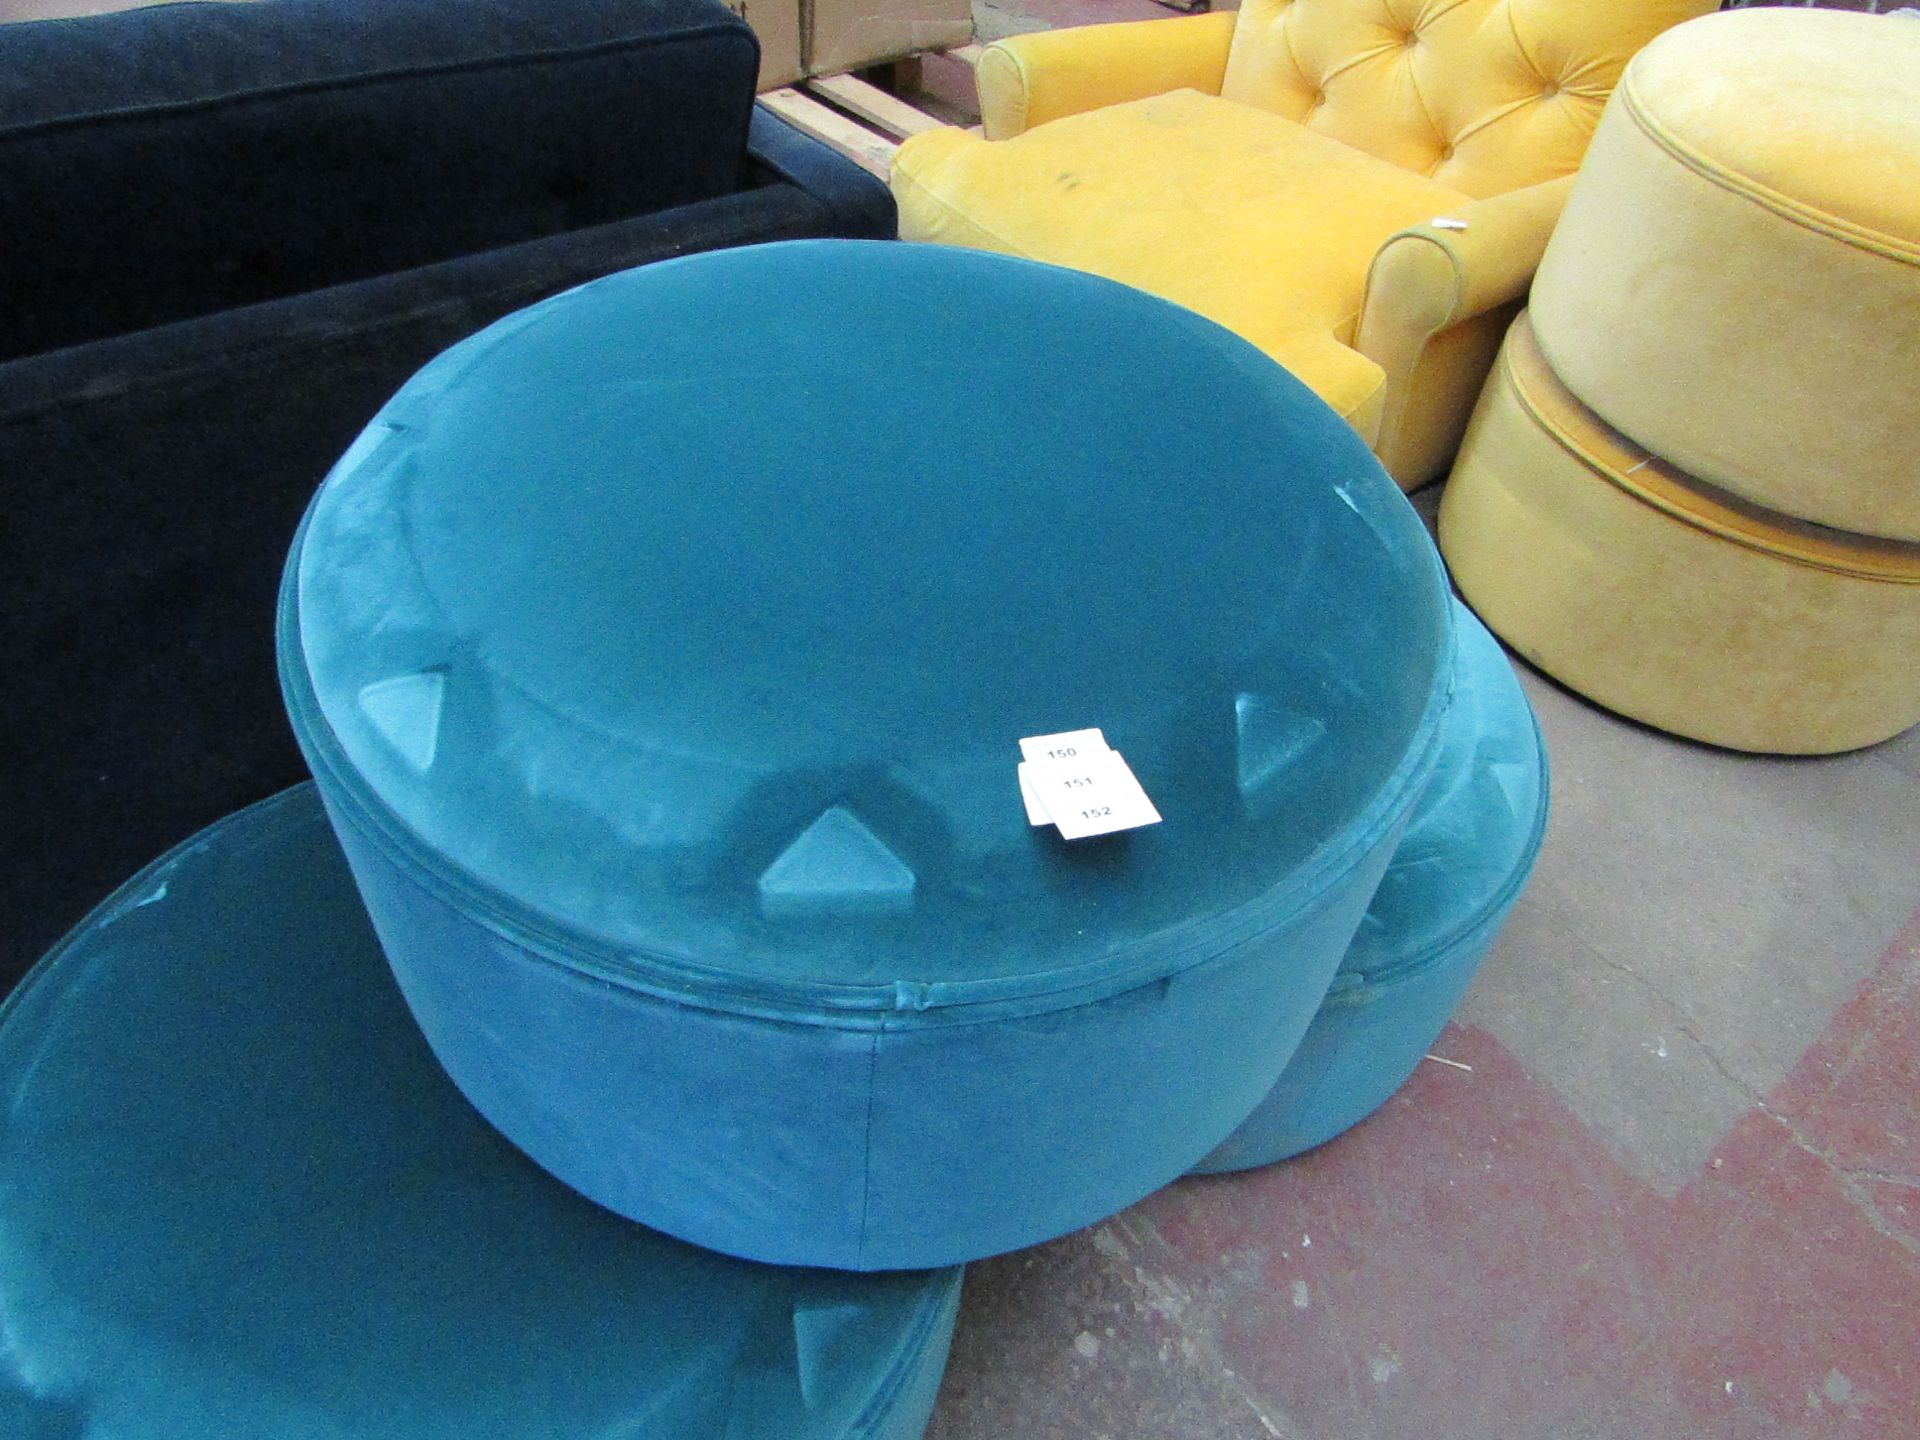 | 1x | SWOON CIRCULAR FOOTSTOOL | FEW MARKS AND COULD DO WITH A CLEAN, HAS IMPRINTS OF THE FEET FROM